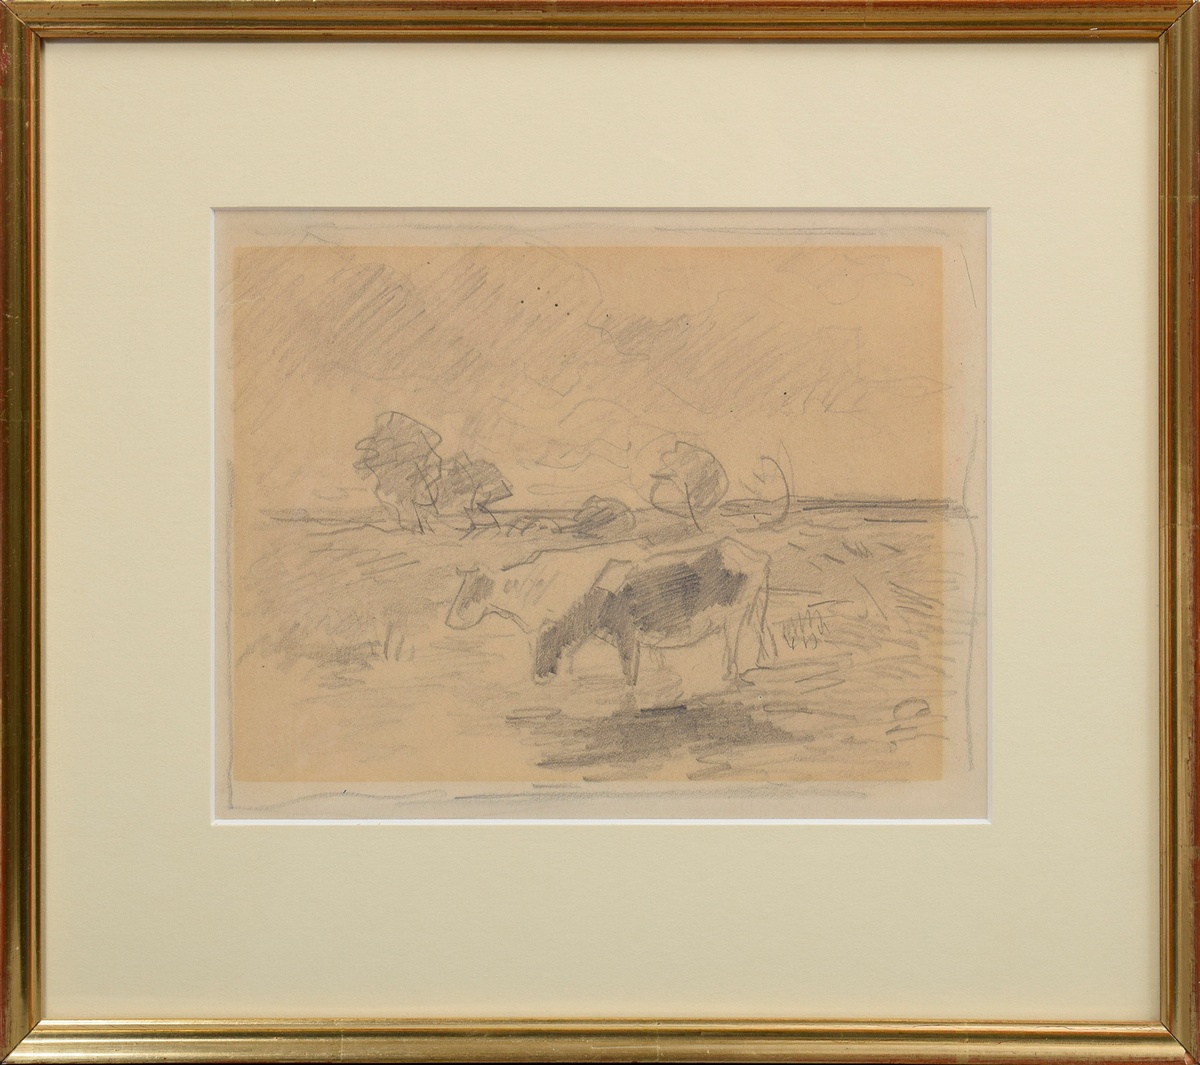 Herbst, Thomas (1848-1915) "Landscape with cows", pencil drawing, 17,5x23cm (w.f. 30,7x35,5cm), lig - Image 2 of 3